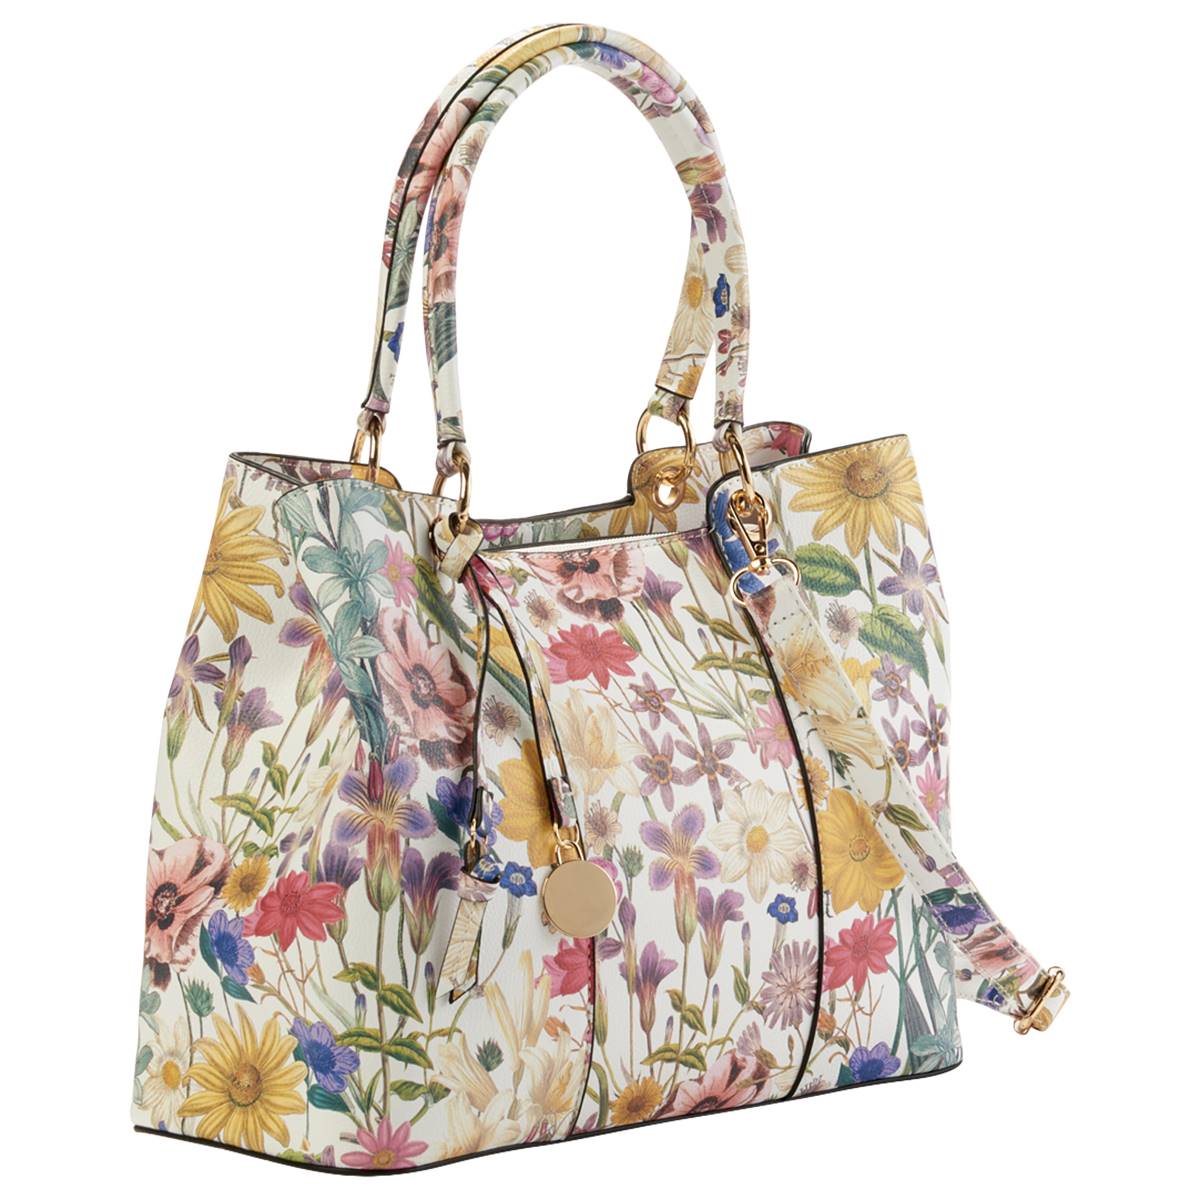 DS Fashion NY Floral Large Satchel